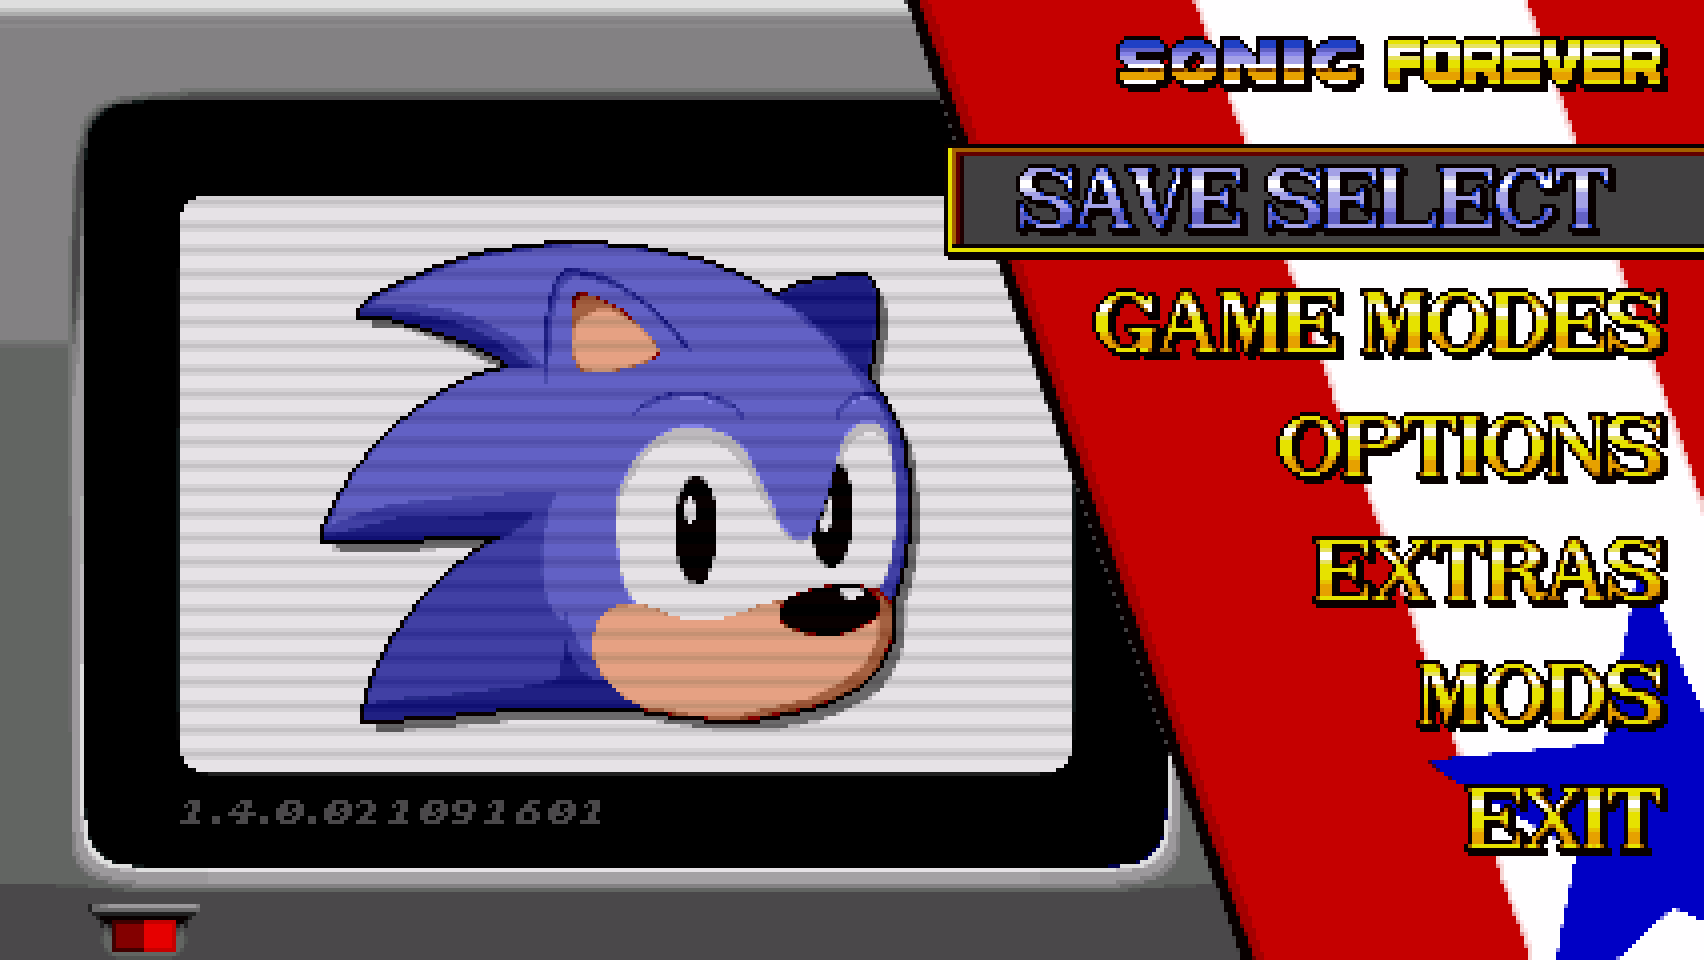 Sonic 3 AIR Sonic SMS OST [Sonic 3 A.I.R.] [Mods]